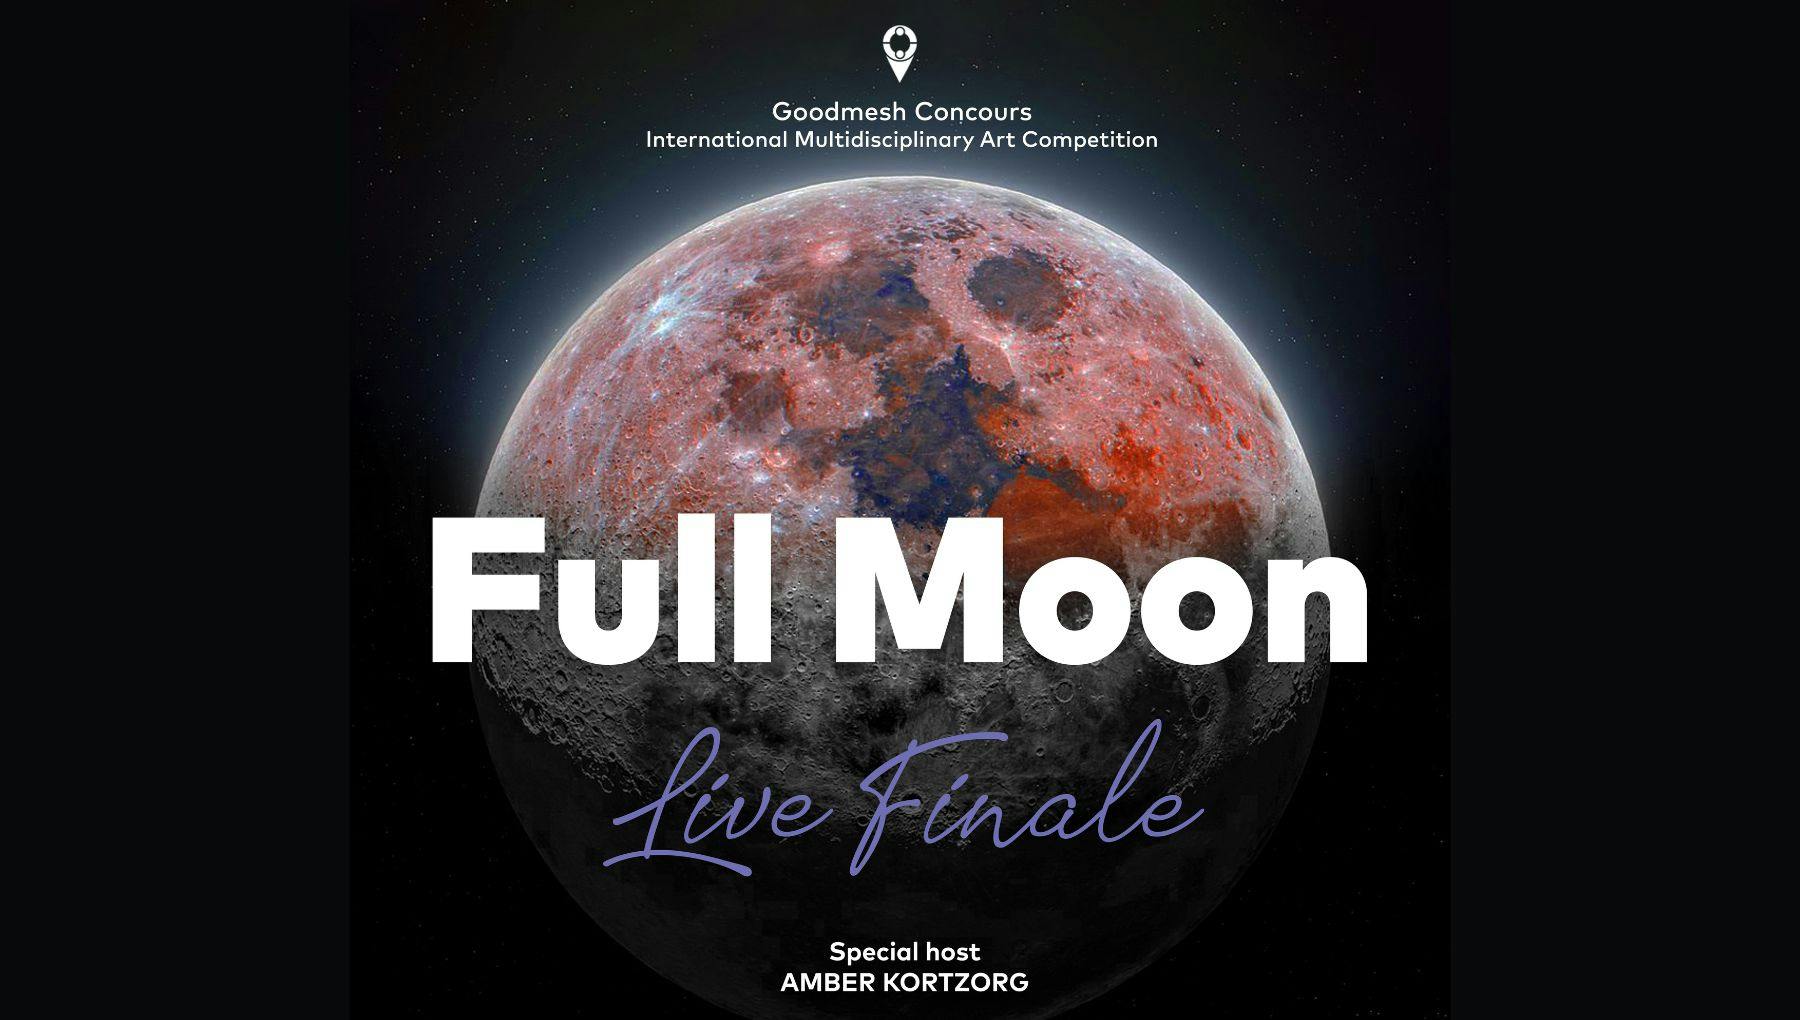 Full Moon Goodmesh Concours